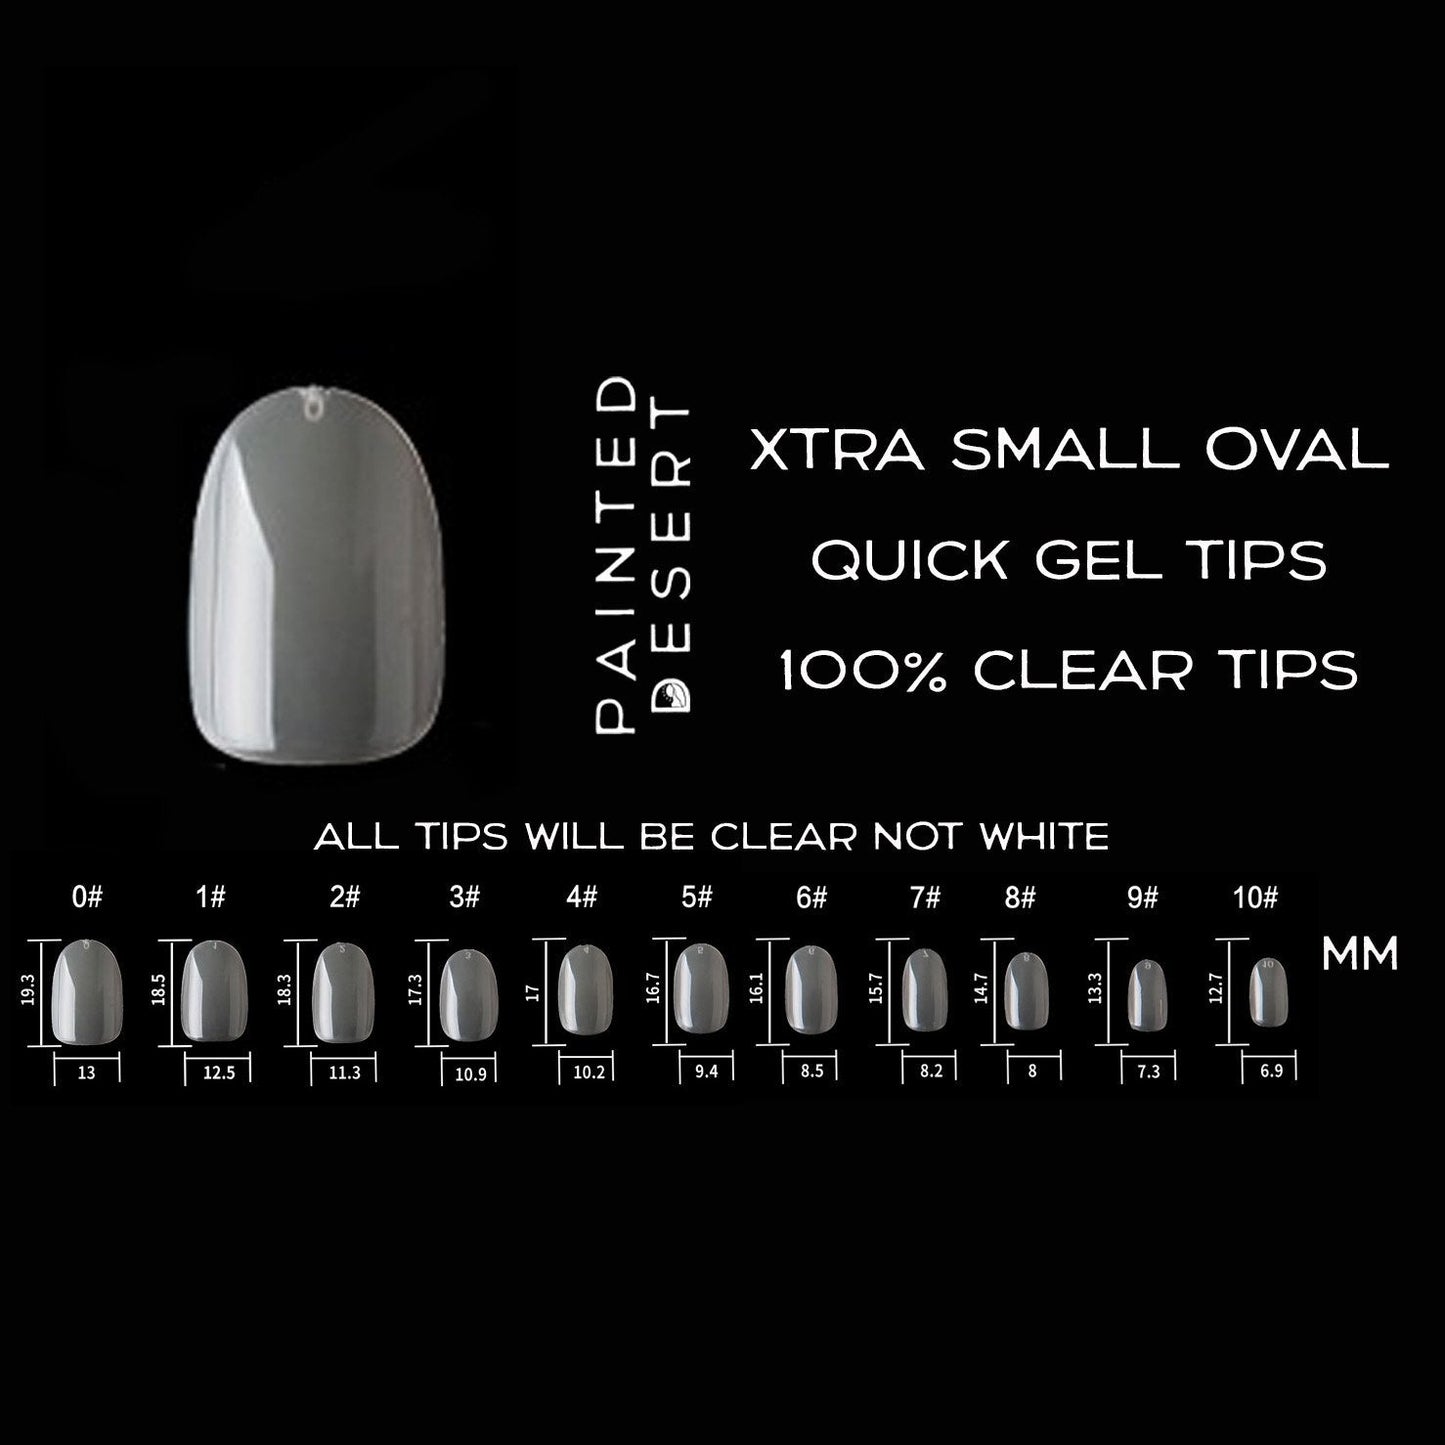 Single Sizes Xtra Small Oval Quick Gel Tips